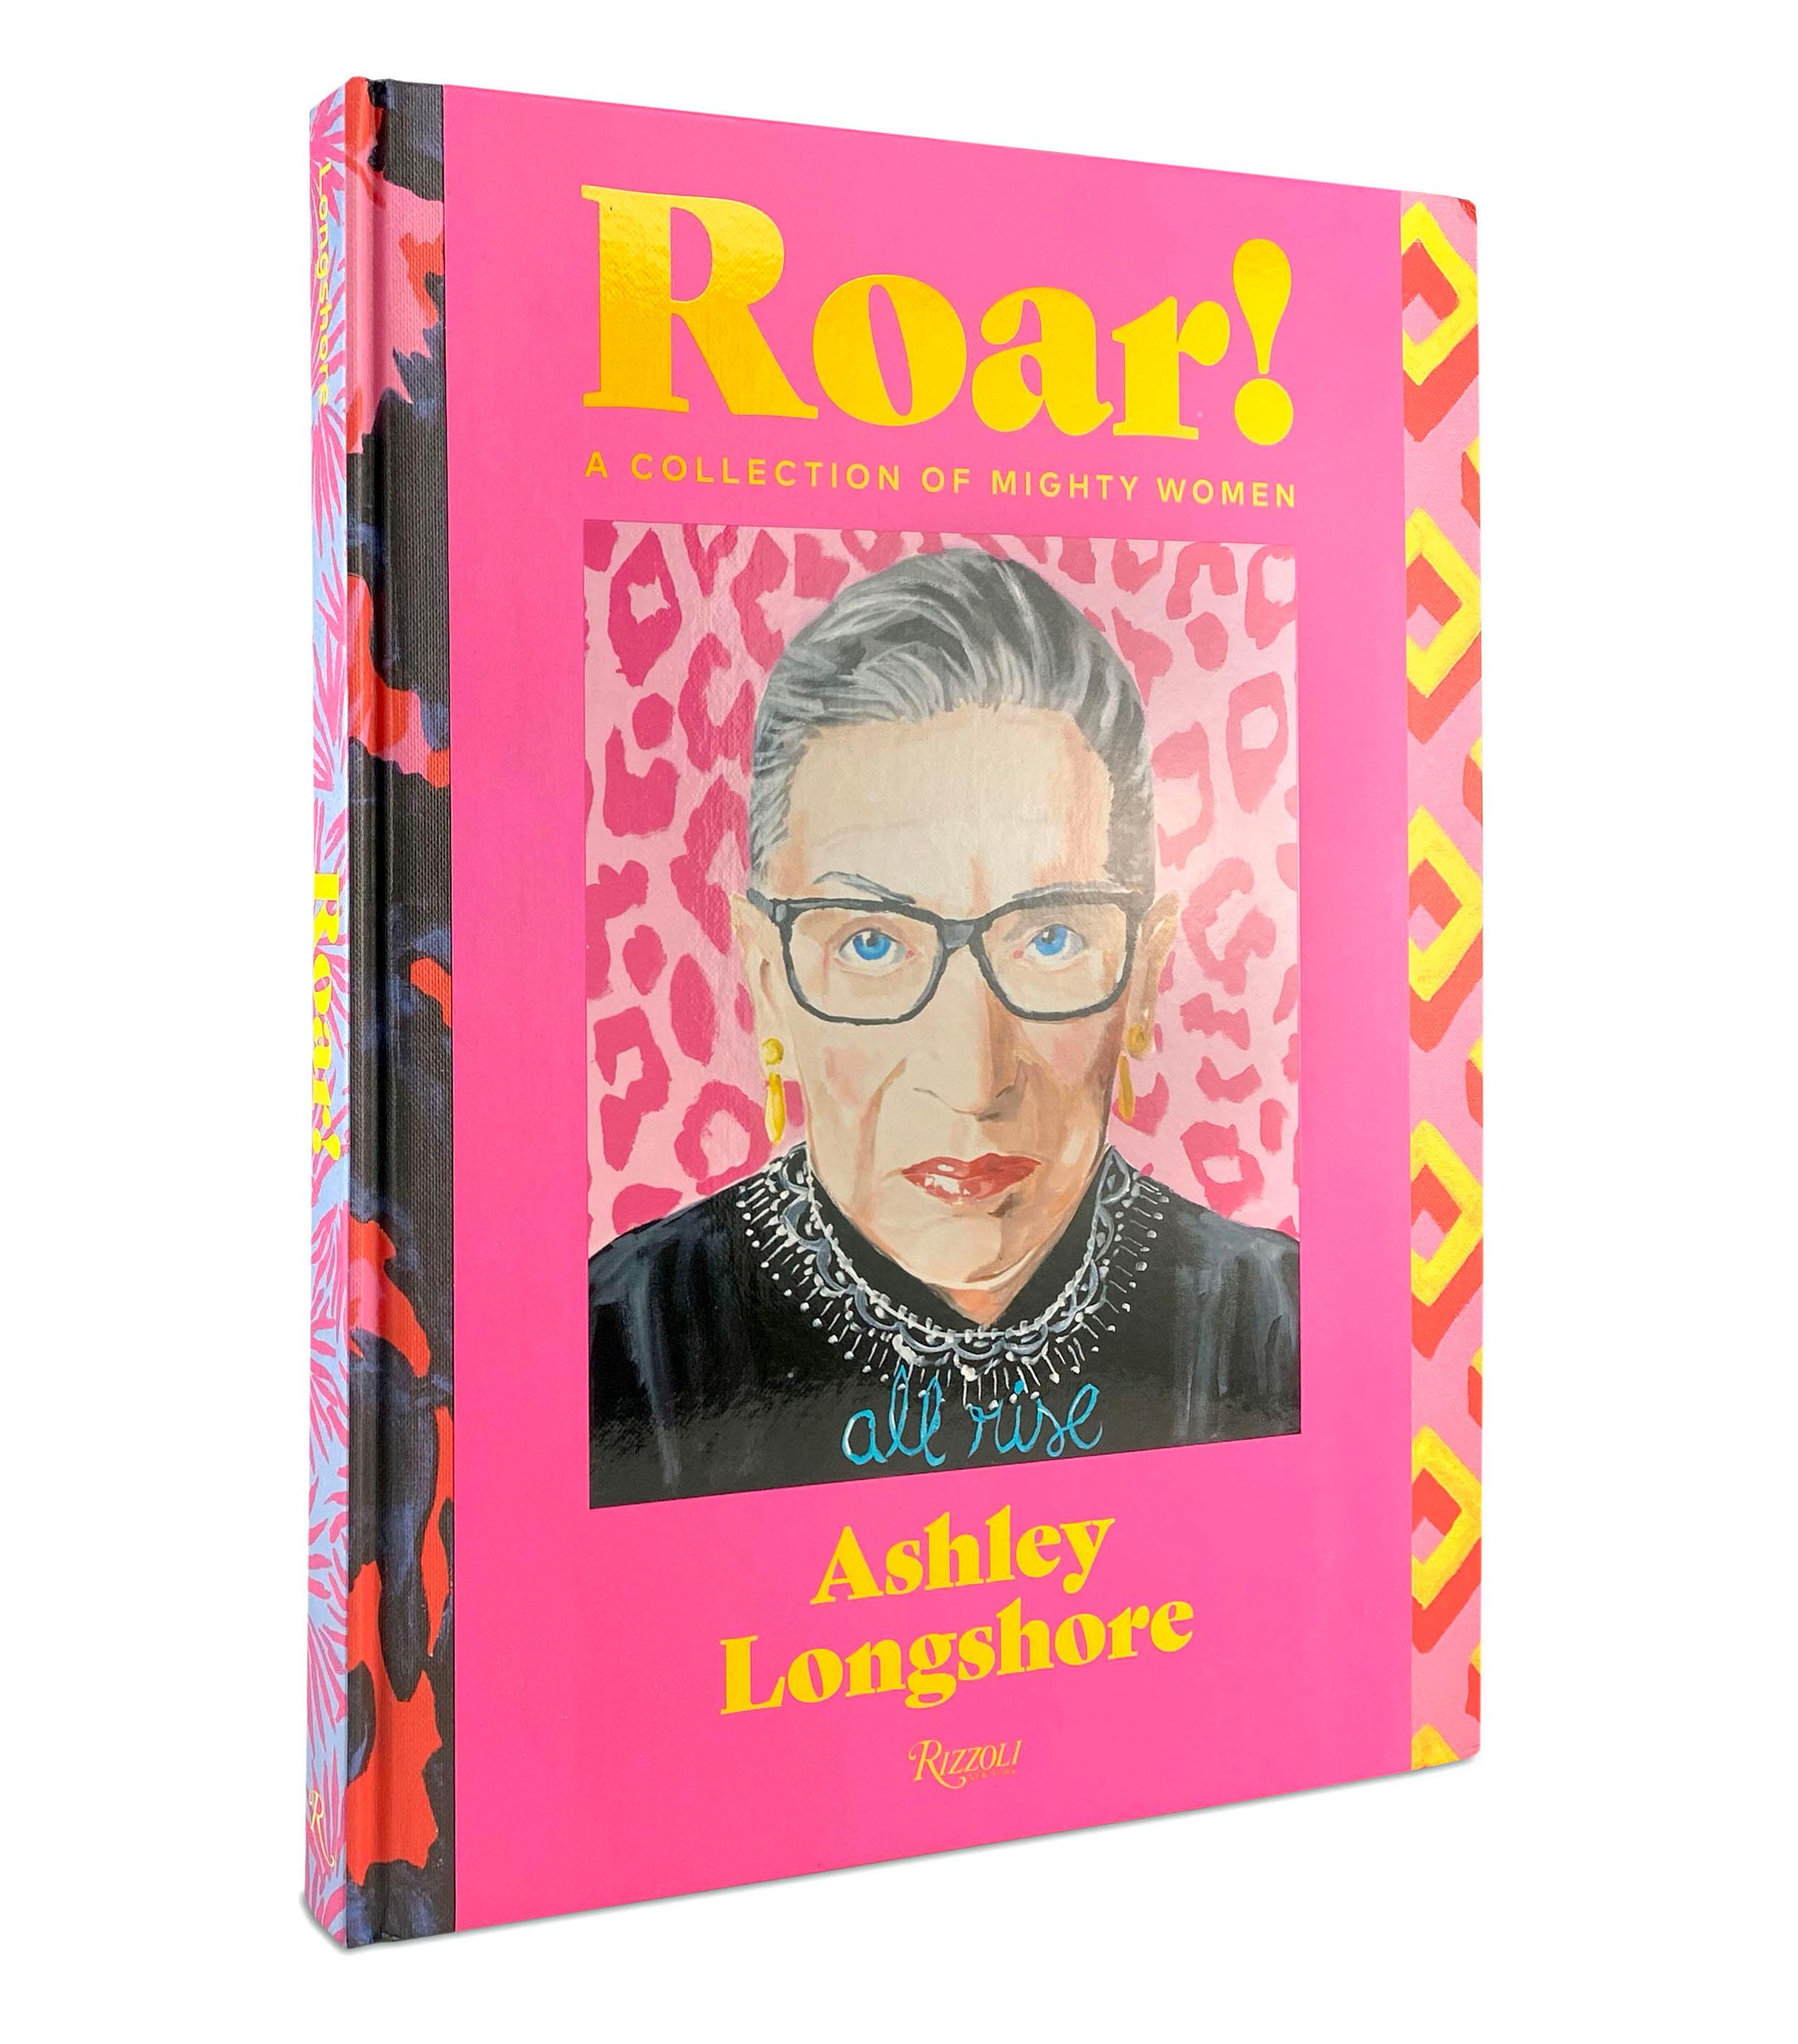 Roar!: A Collection of Mighty Women
Author Ashley Longshore, Introduction by Diane von Fürstenberg

On the heels of Ashley Longshore’s successful I Do Not Cook, I Do Not Clean, I Do Not Fly Commercial comes Roar! A Collection of Mighty Women: